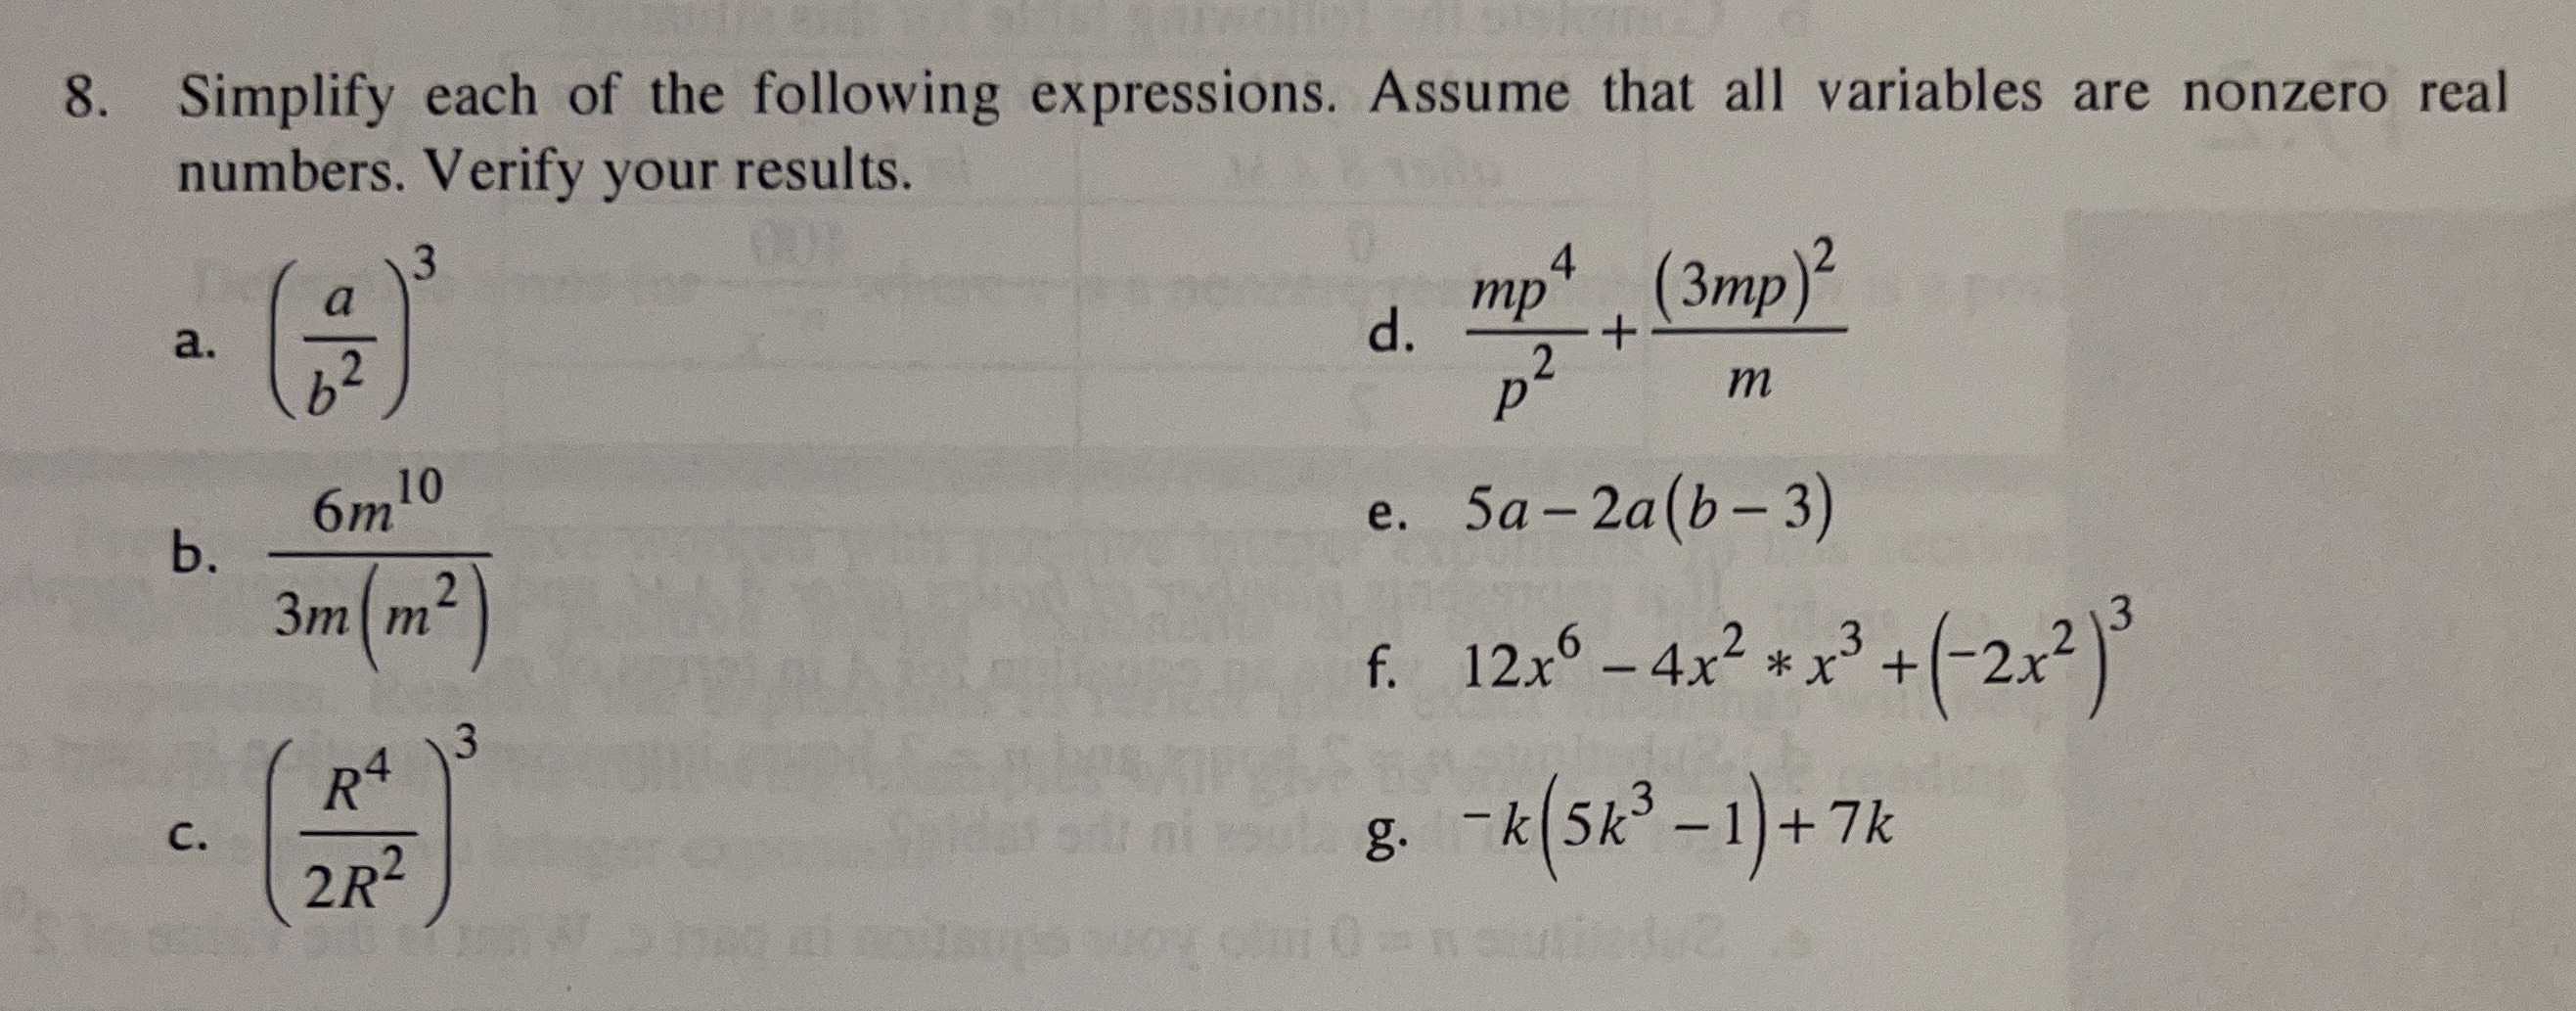 8. Simplify each of the following expressions. Ass...